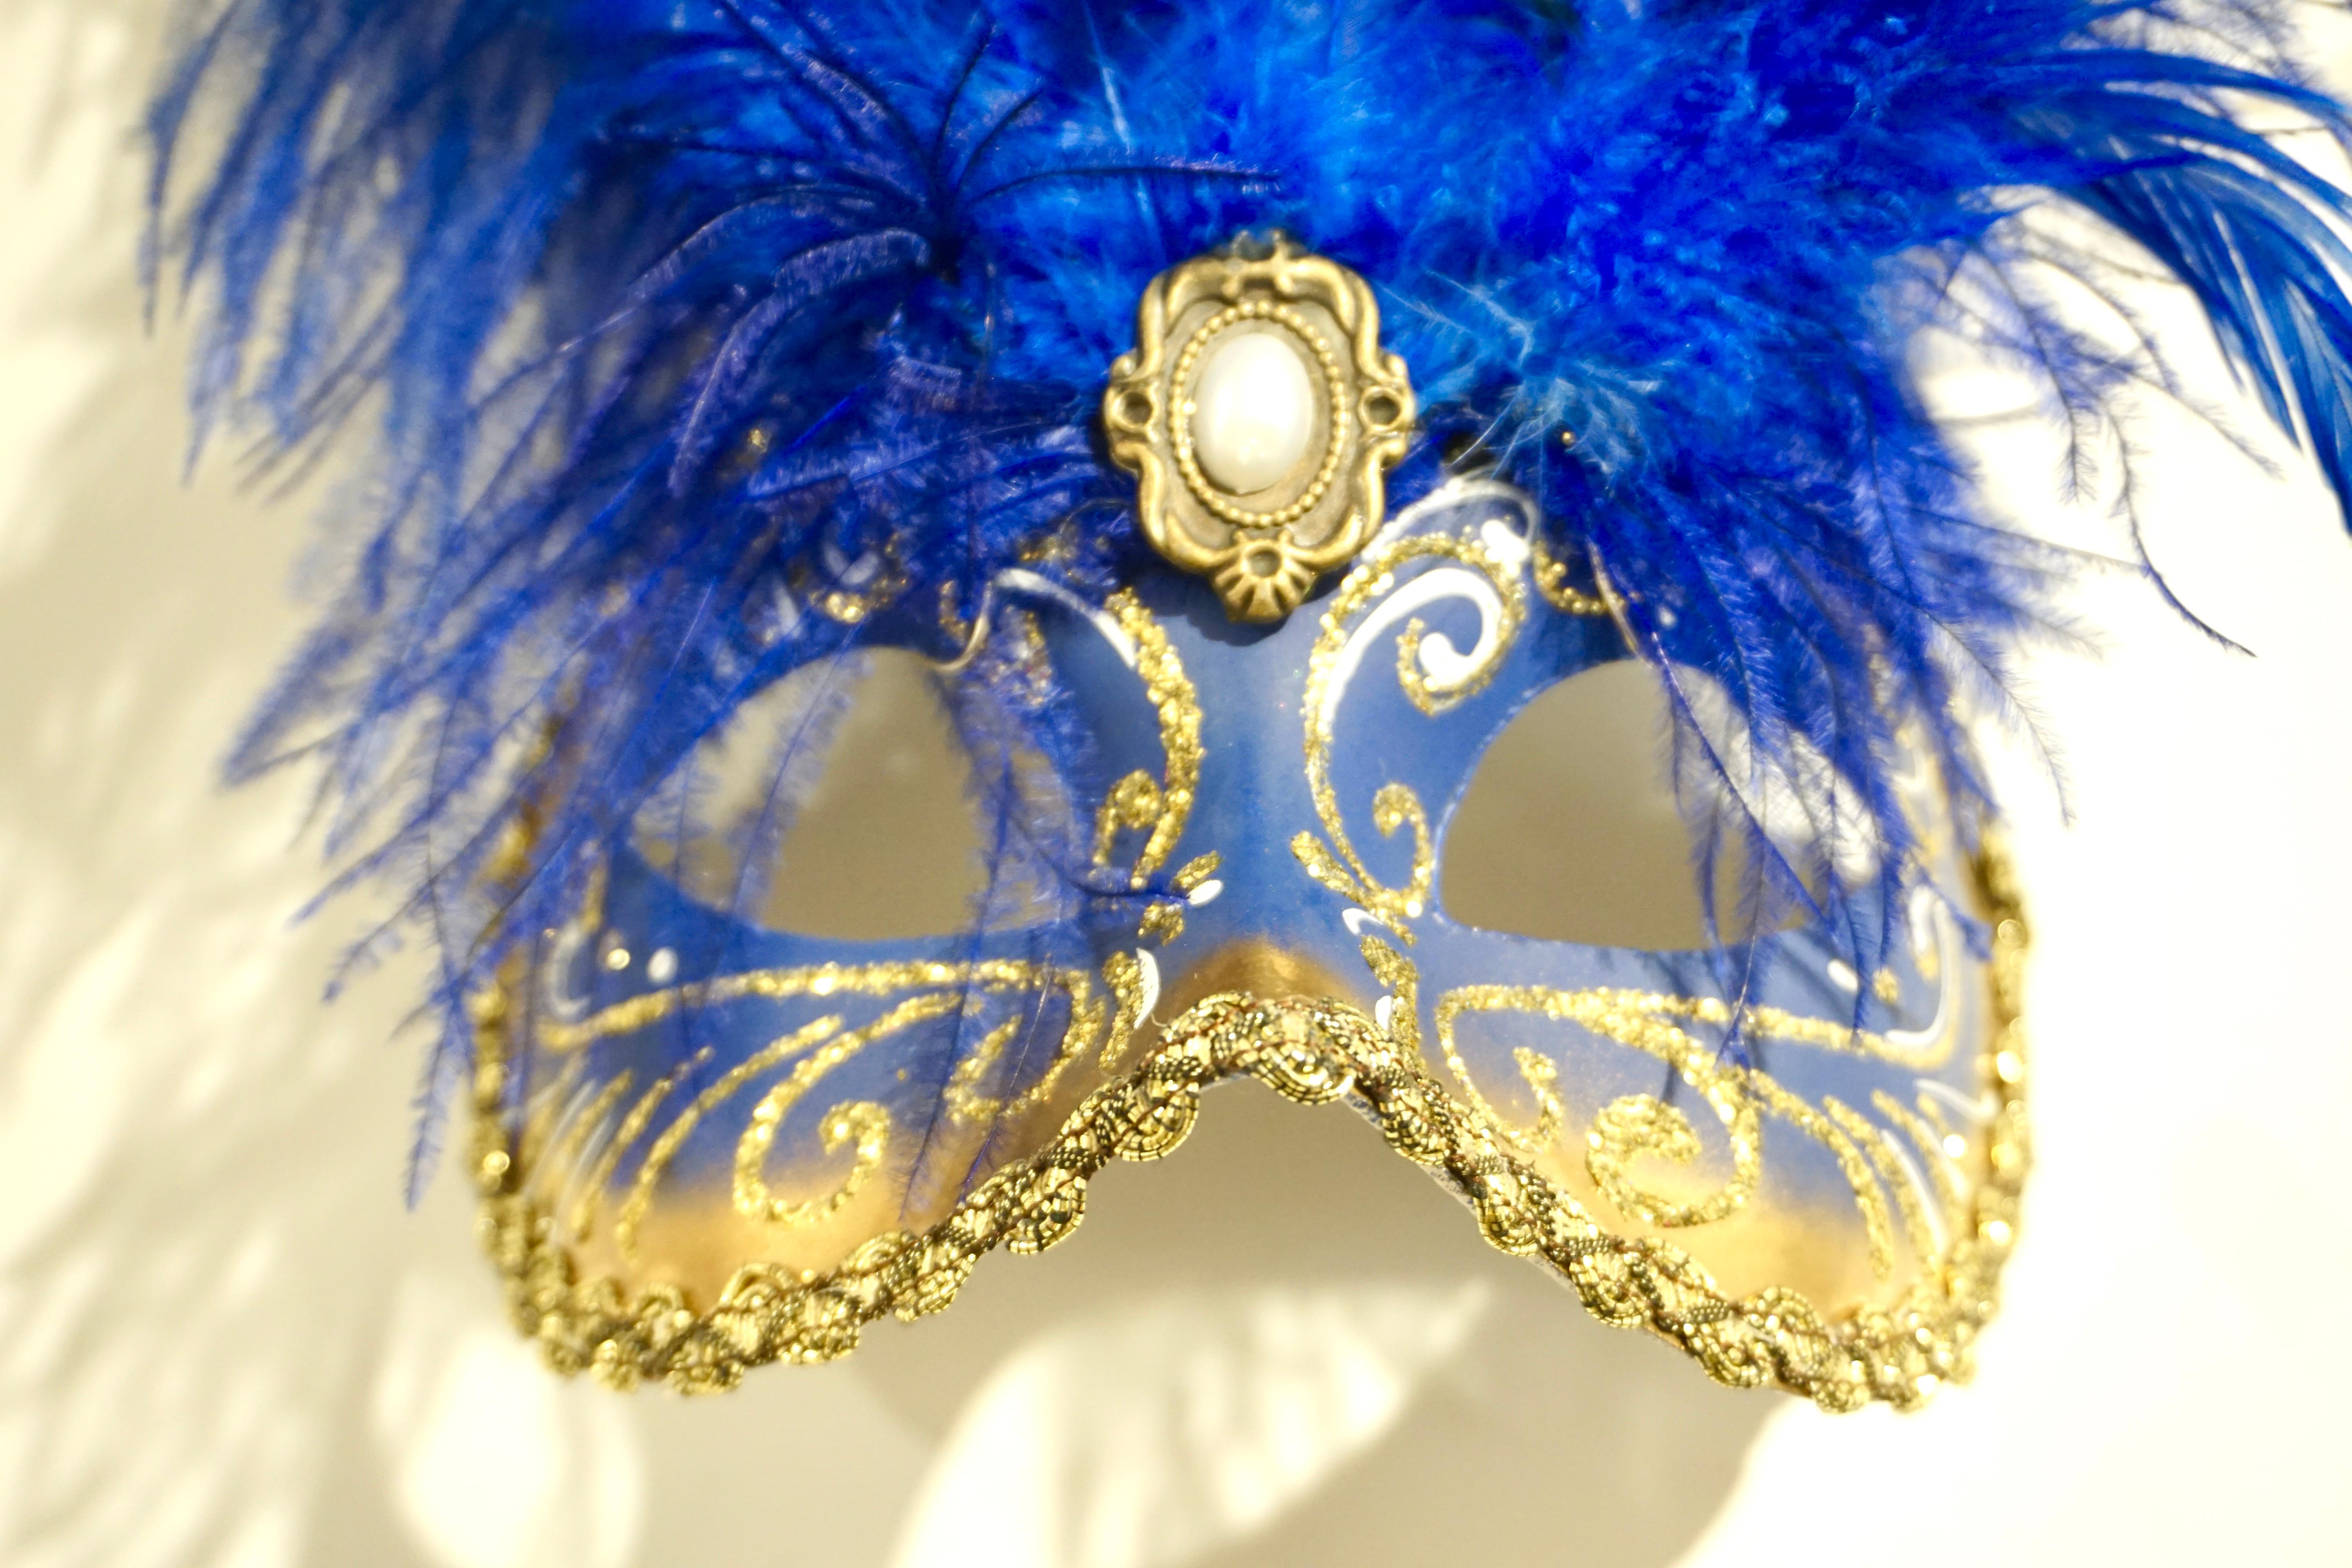 This Folk Art cobalt blue mask is a real Venetian creation, entirely hand-drawn and handcrafted with gold decor and white stone. 
Italian Artists have realized this piece in full respect of craftsmanship traditions and following original designs